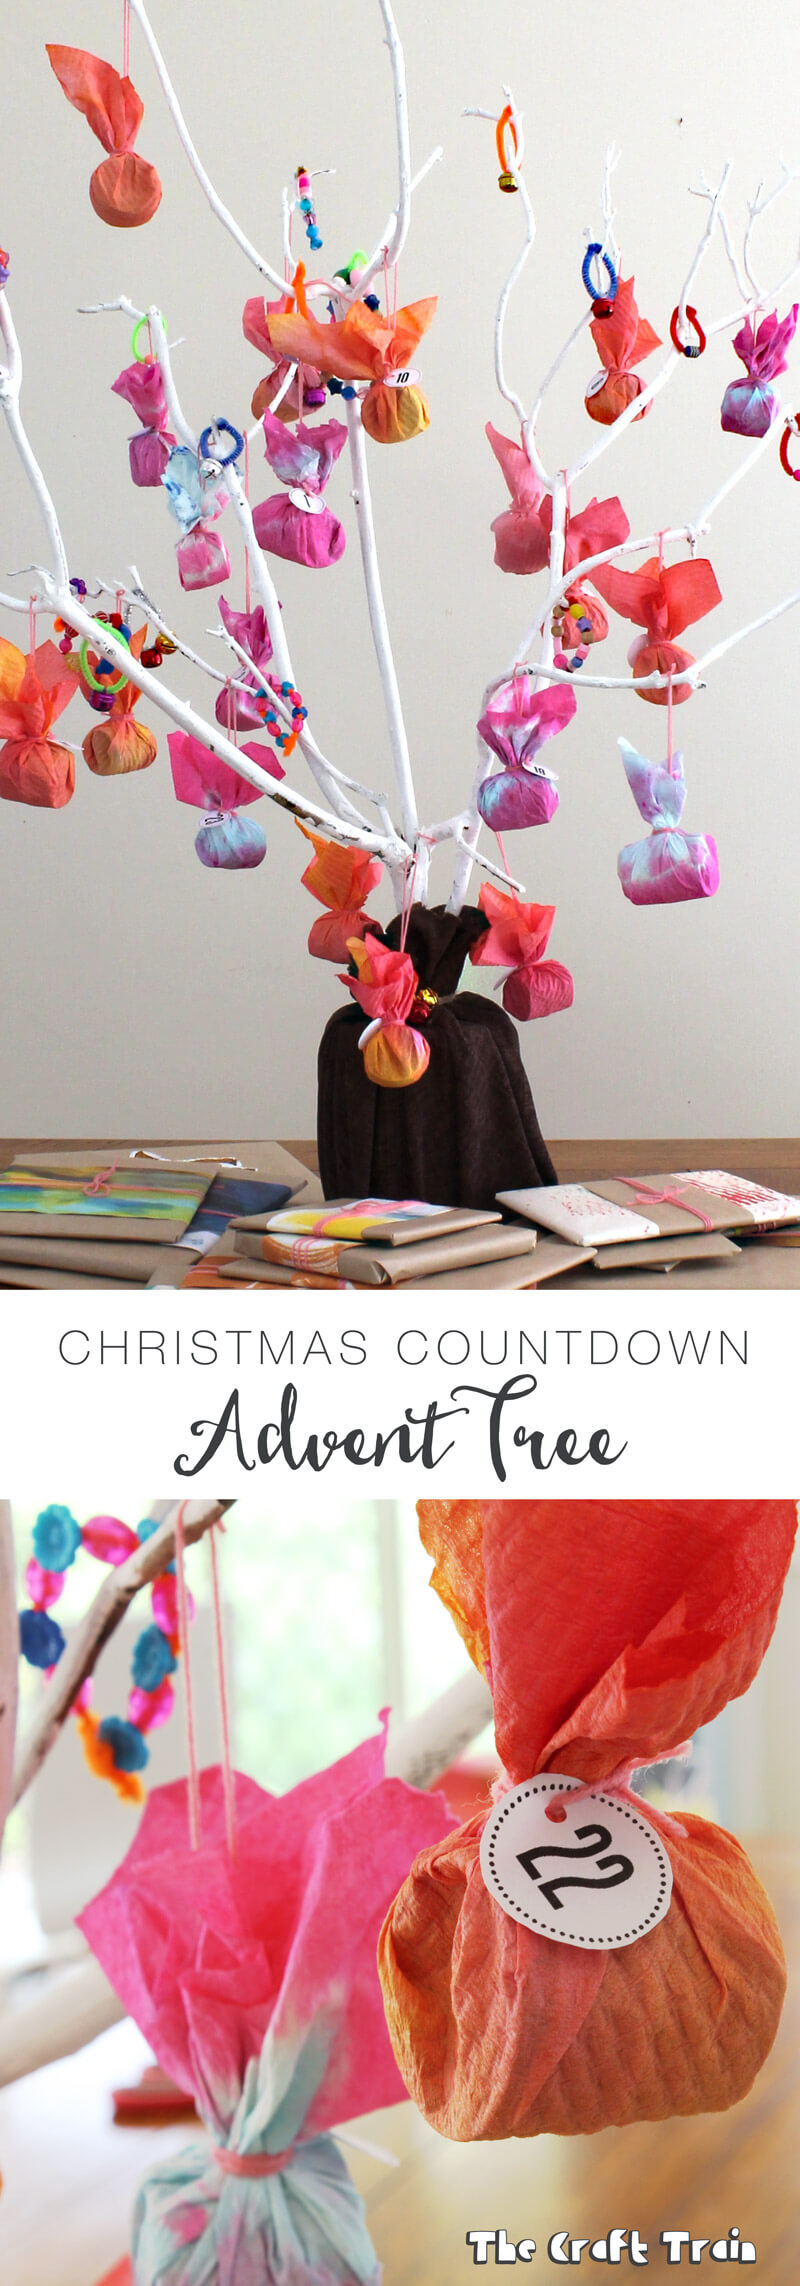 Advent tree calendar made from tie-dyed paper towel and painted branches. We also put a Christmas book advent calendar underneath